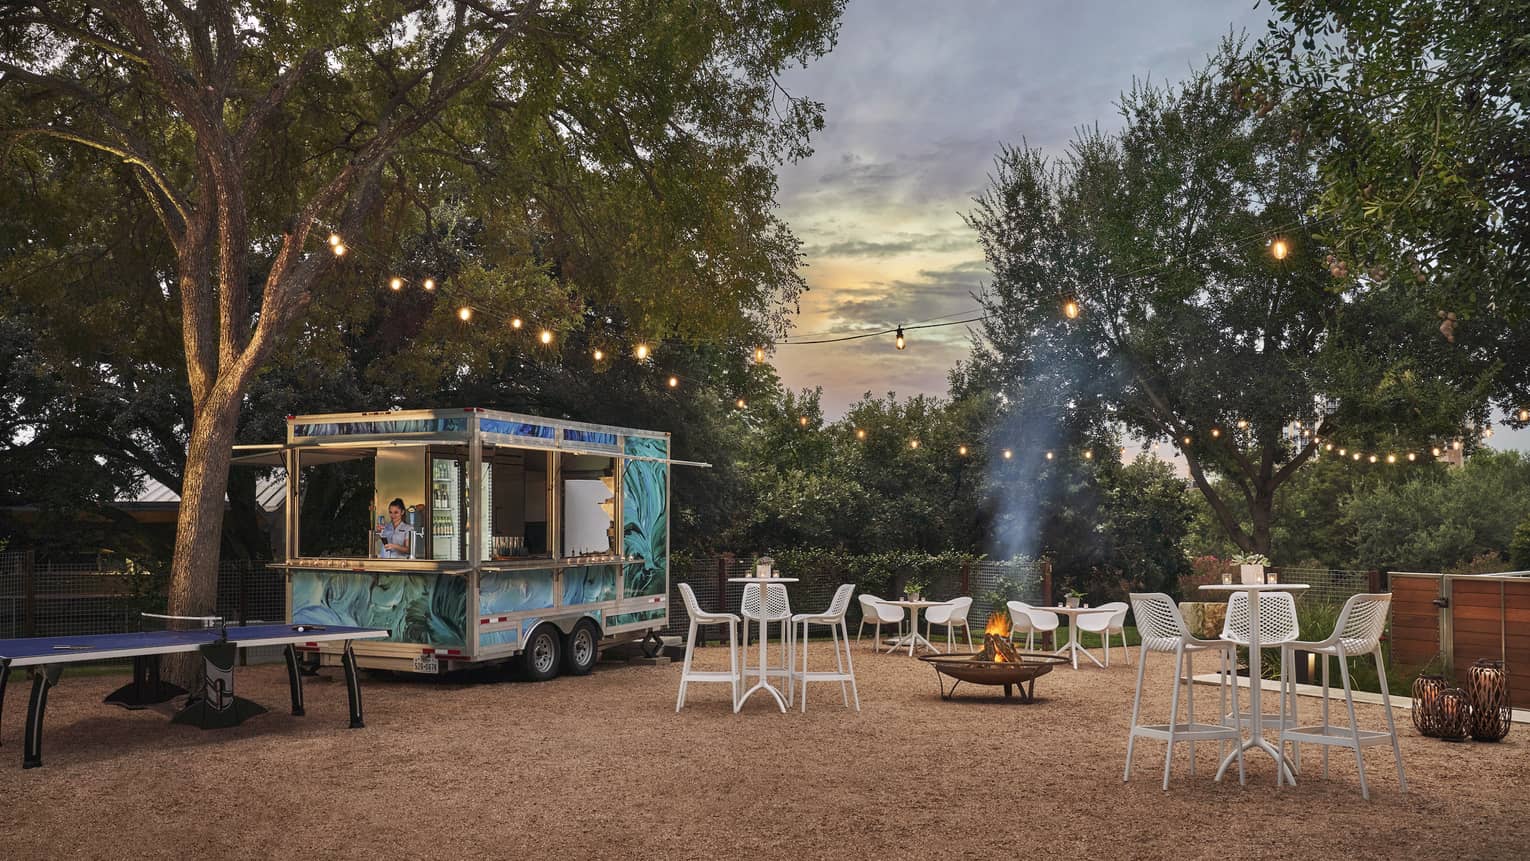 A food truck outsider surrounded by chairs, tables and trees.